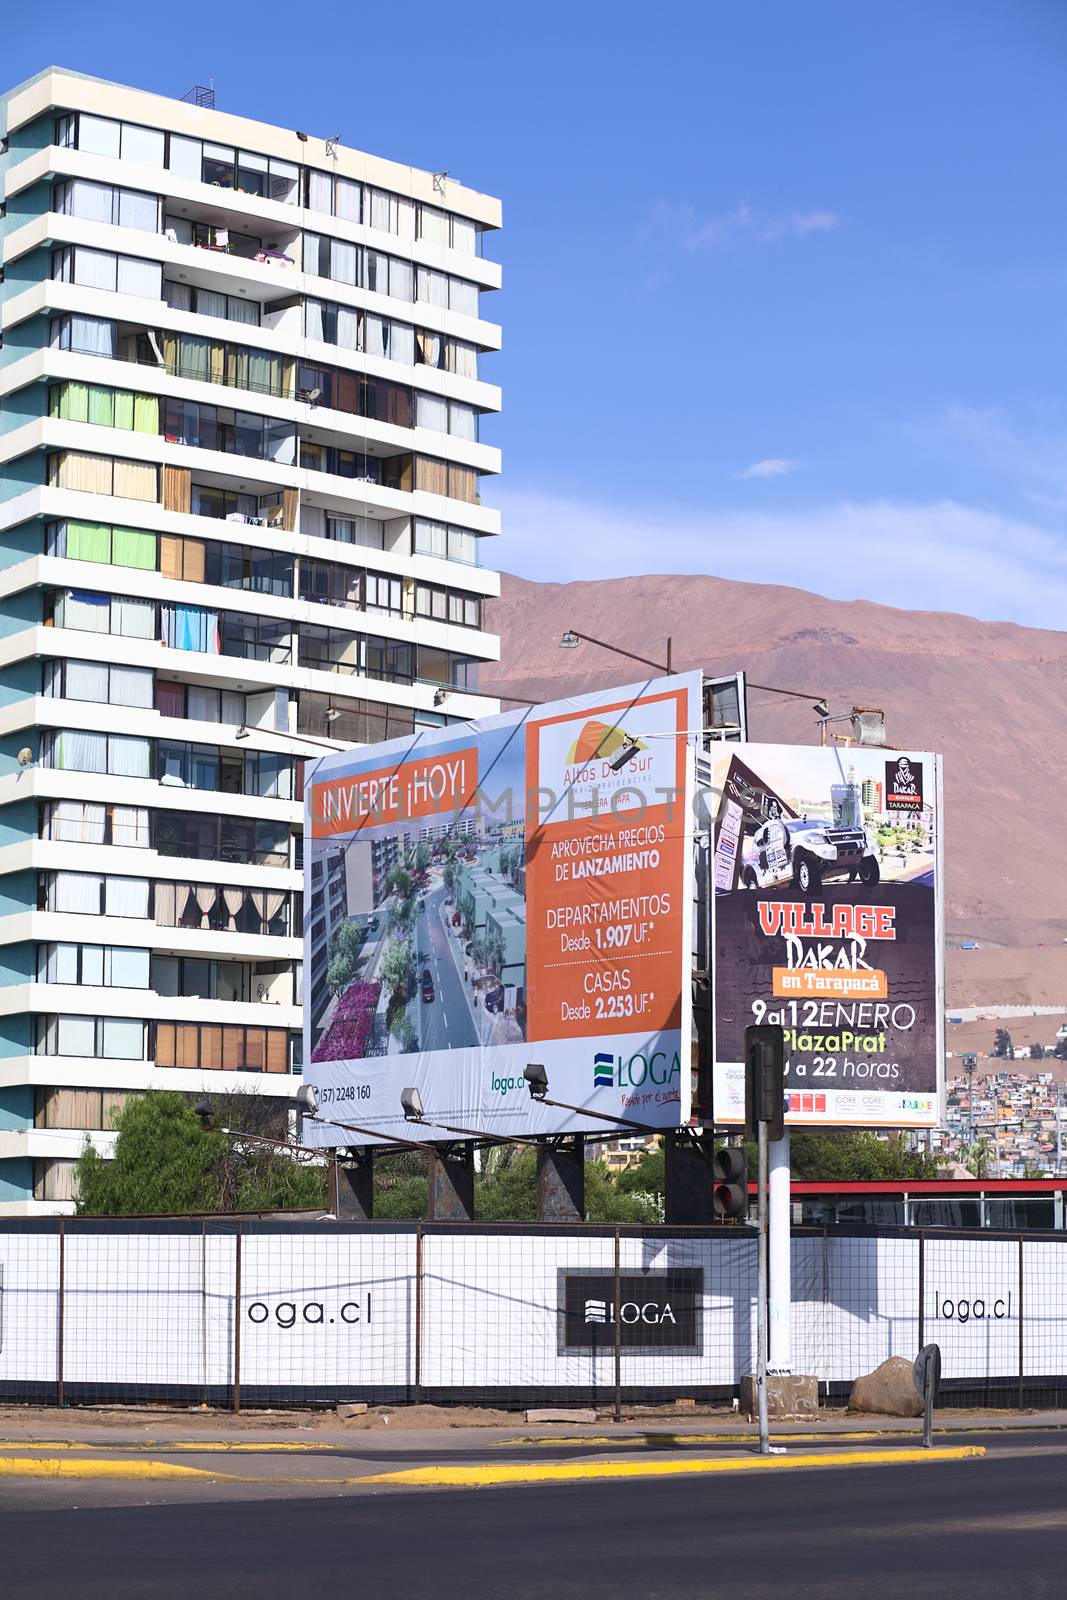 IQUIQUE, CHILE - JANUARY 23, 2015: Sign along Arturo Prat Chacon avenue informing about the construction and sale of new apartments and houses on January 23, 2015 in Iquique, Chile.